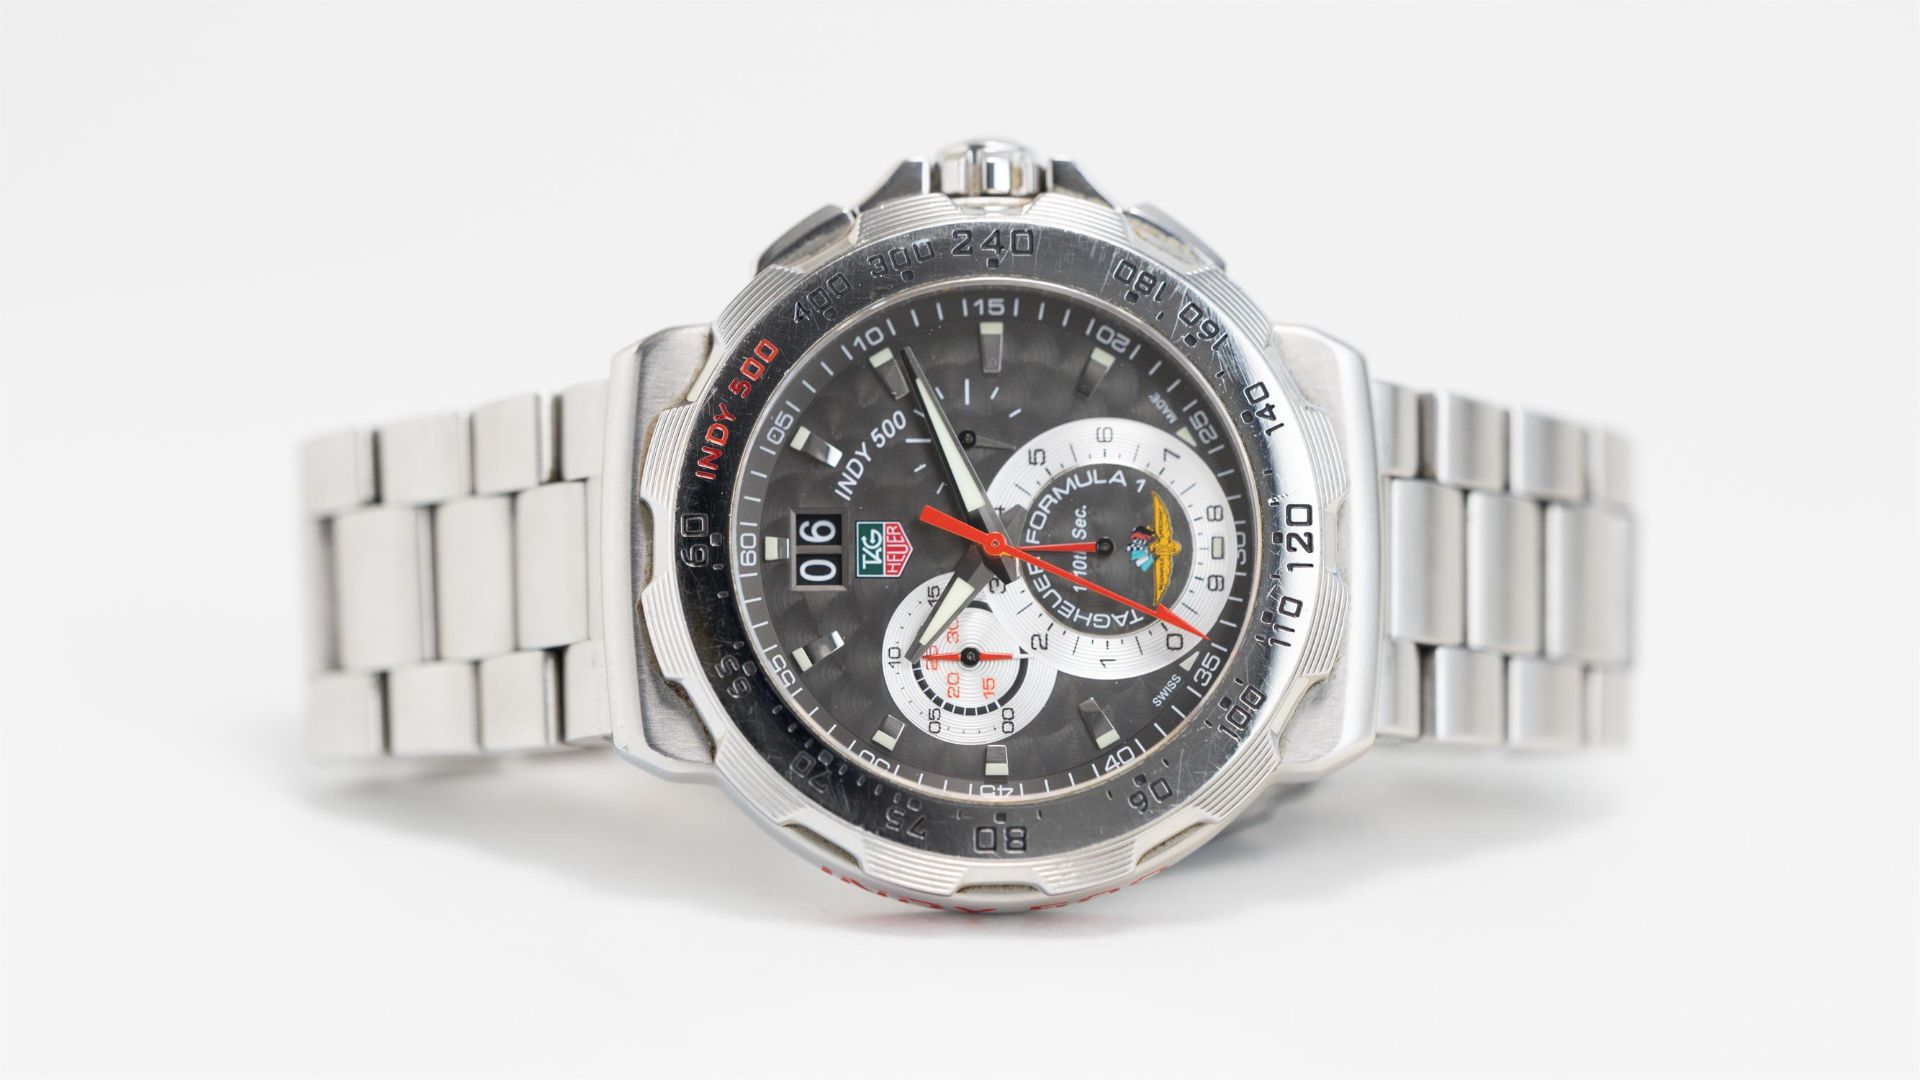 Tag Heuer ‘INDY 500’ F1 2010 - Image 3 of 4